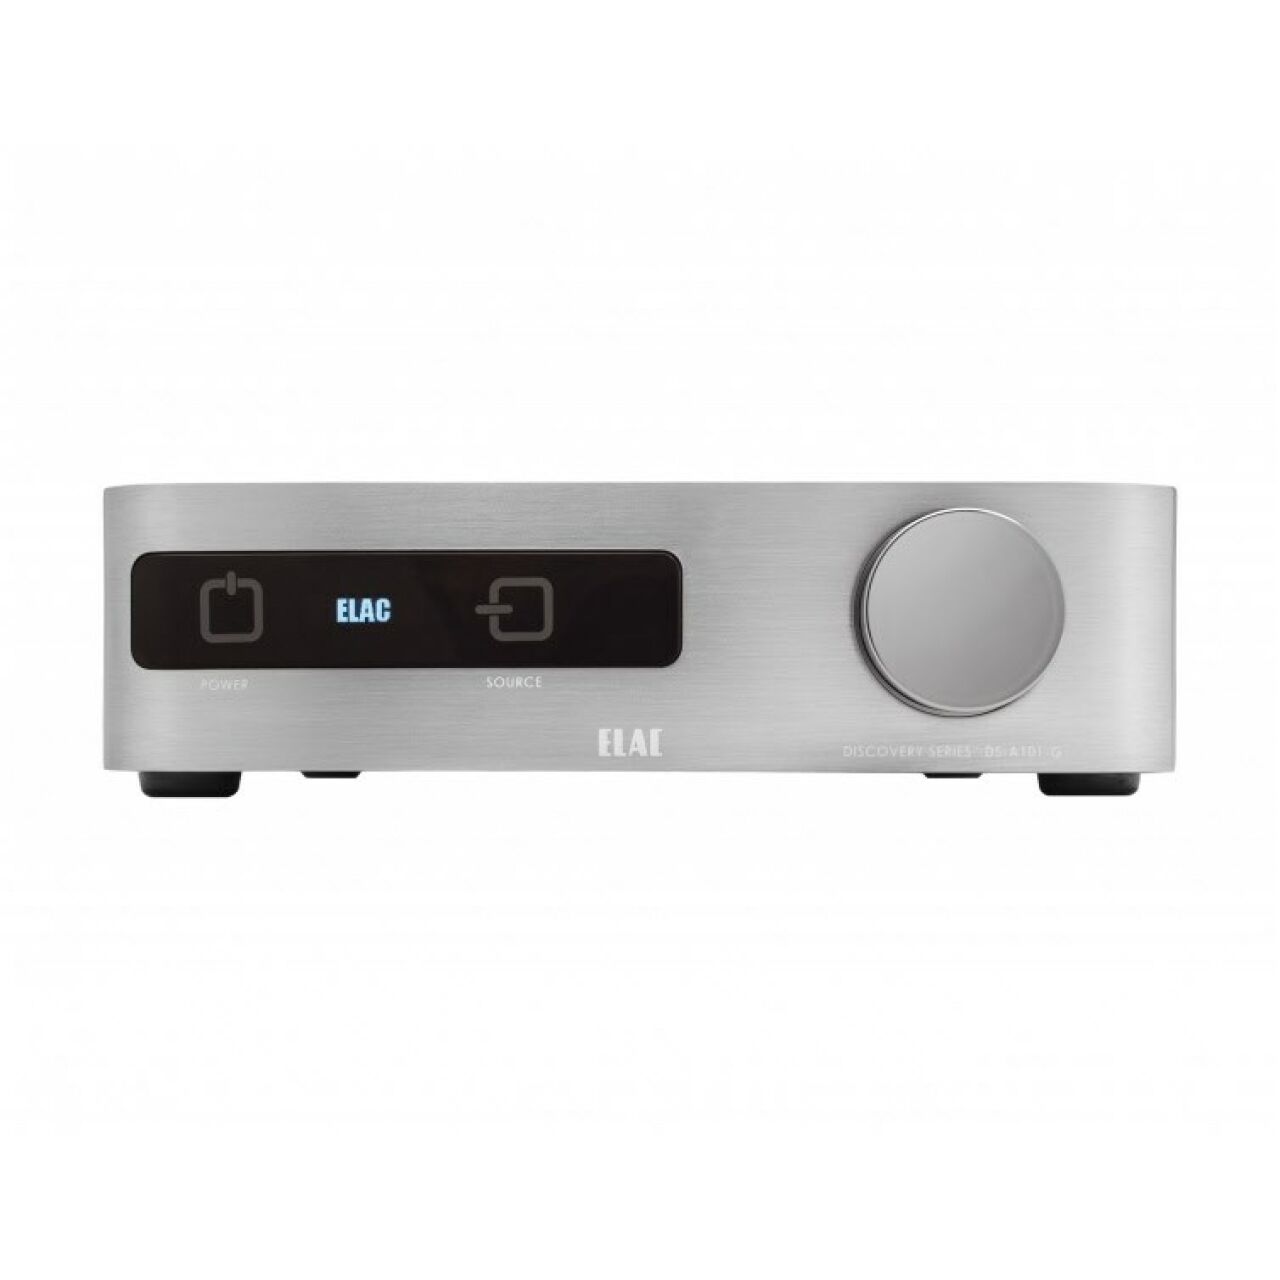 Elac Discovery Amp DS-A101G